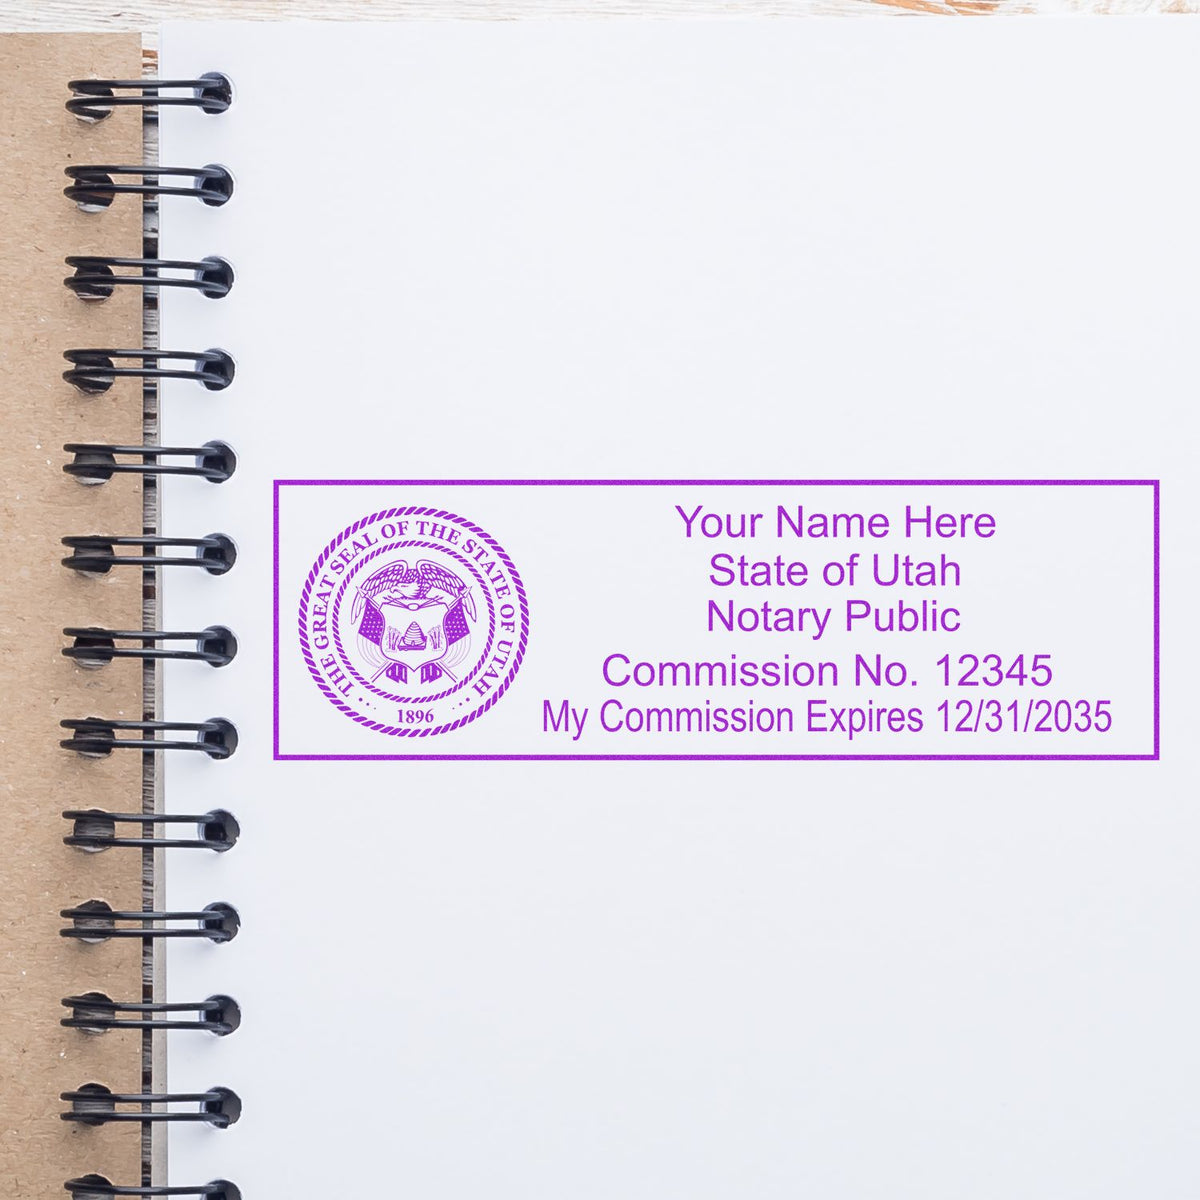 An alternative view of the Super Slim Utah Notary Public Stamp stamped on a sheet of paper showing the image in use